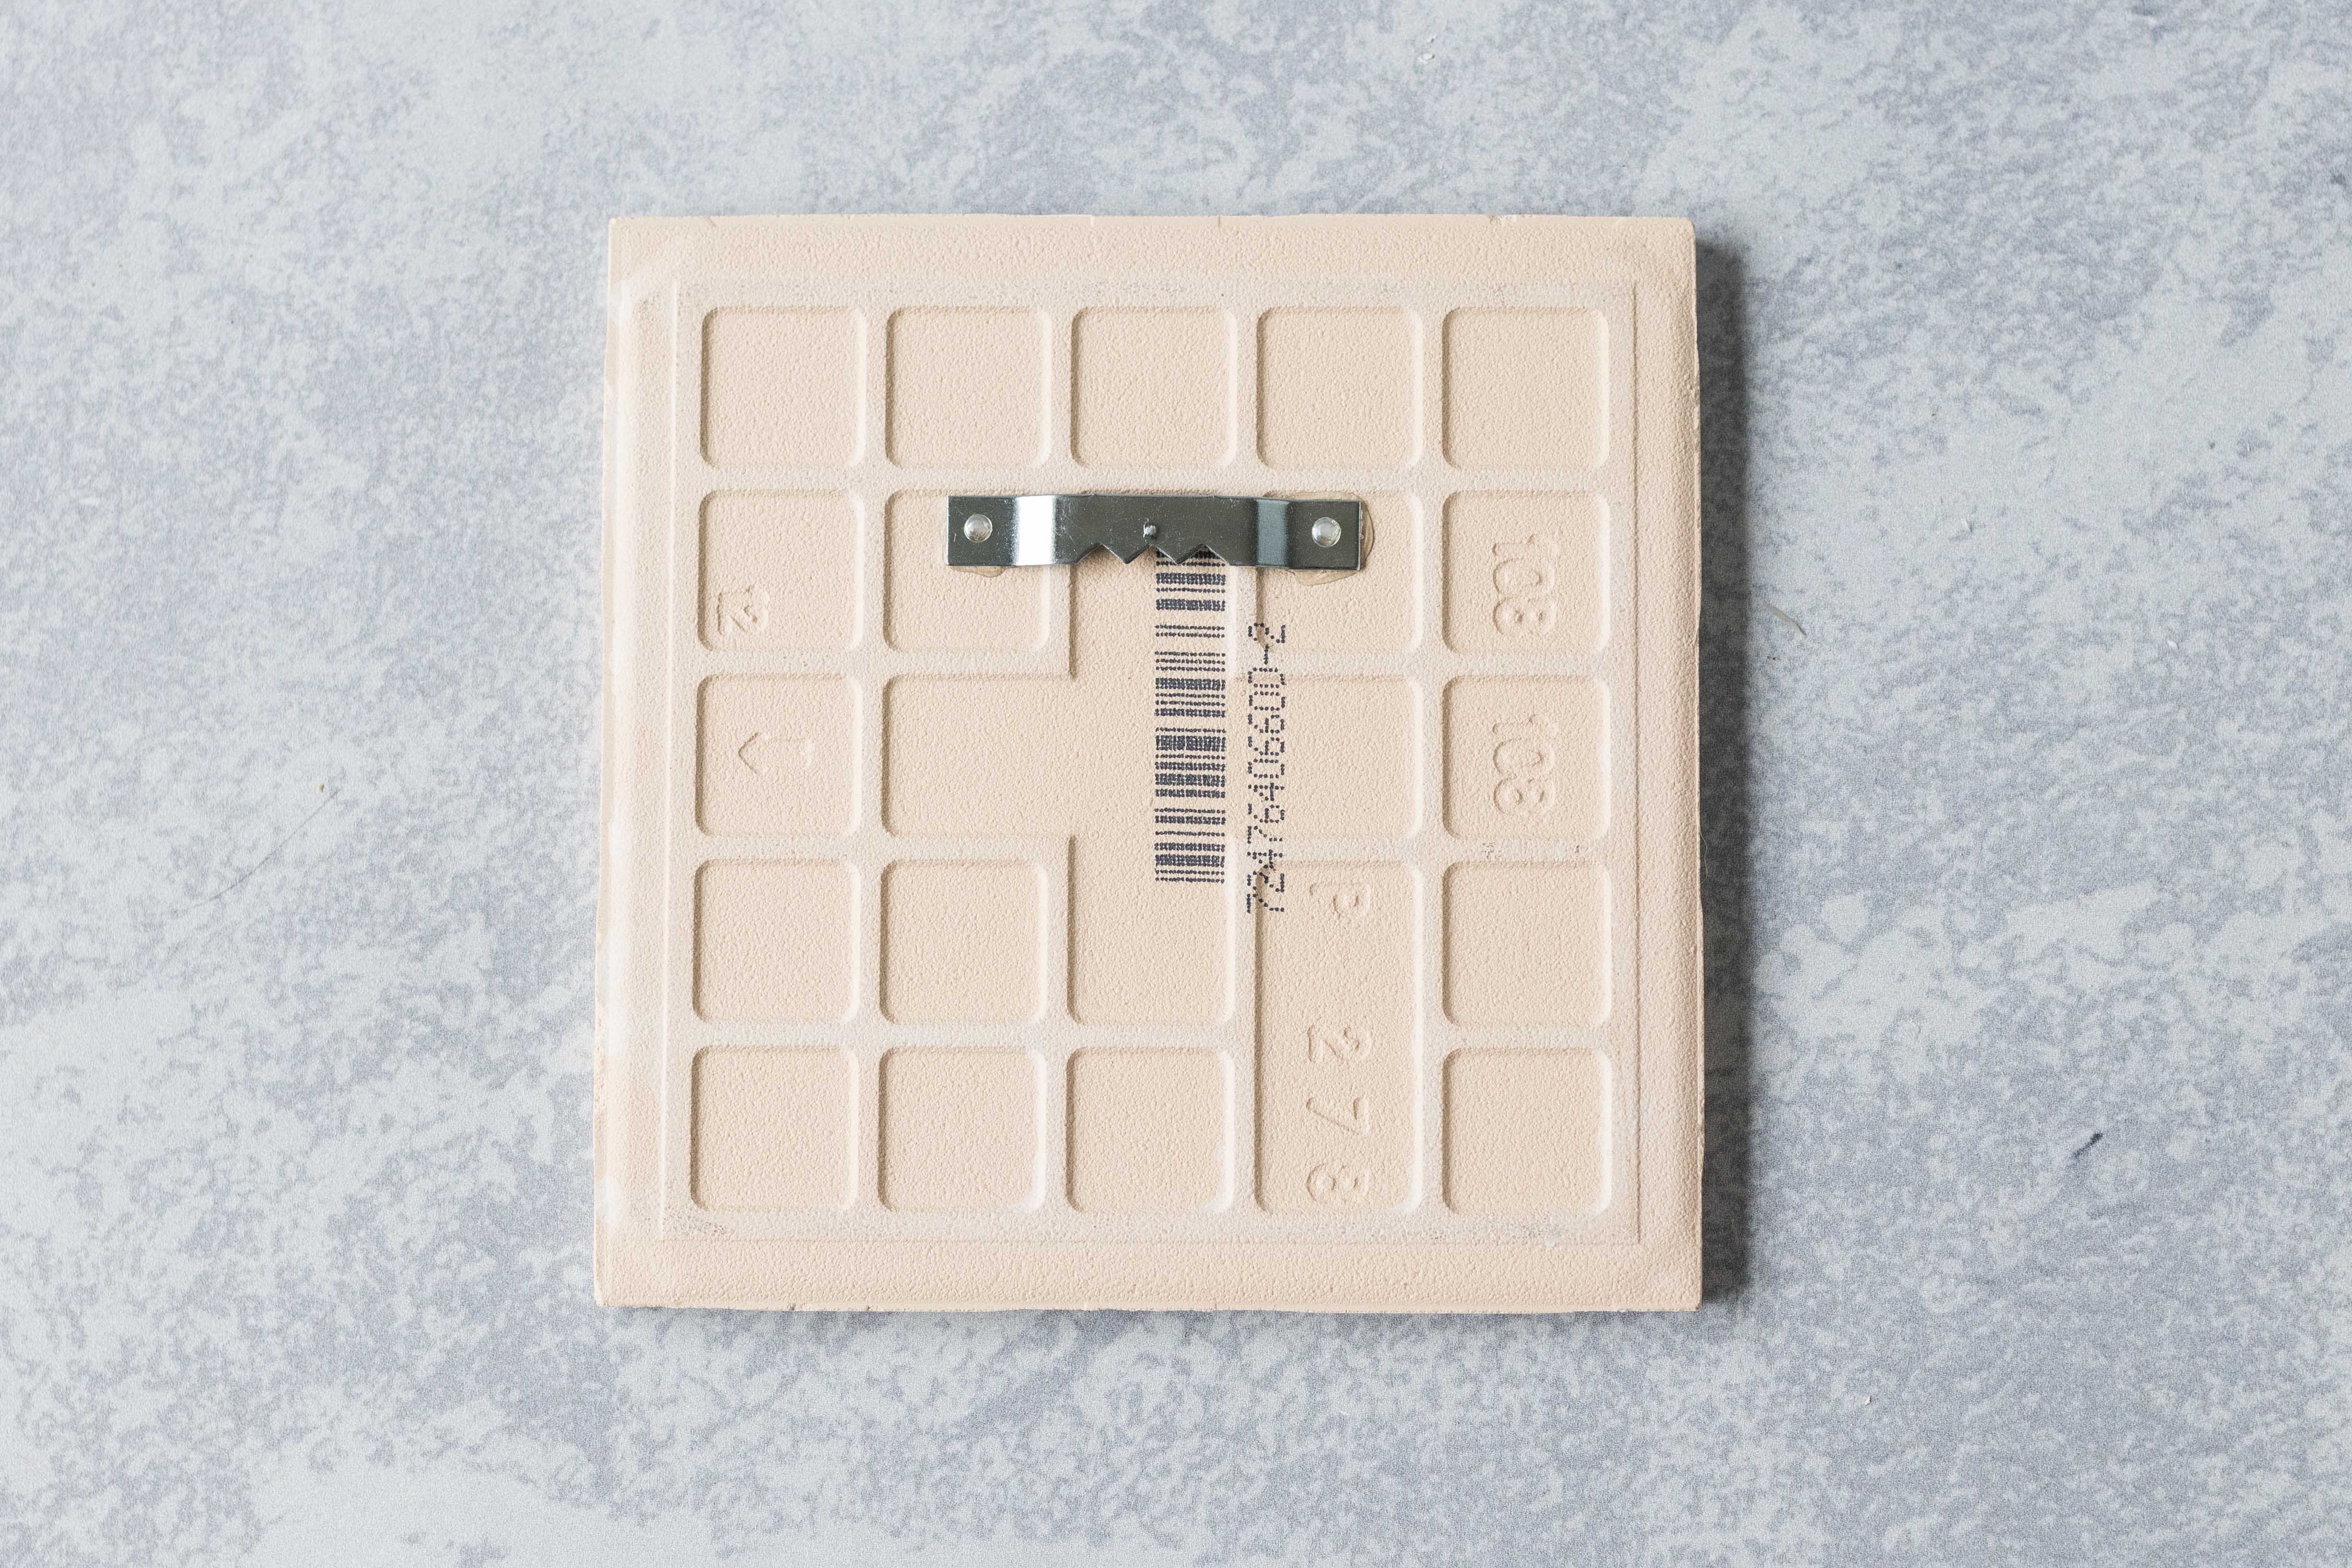 A sawtooth hanger, attached with E-6000 adhesive, is perfect for hanging decorated ceramic tiles. #DIY #sawtoothhanger #ceramictiles | https://www.roseclearfield.com